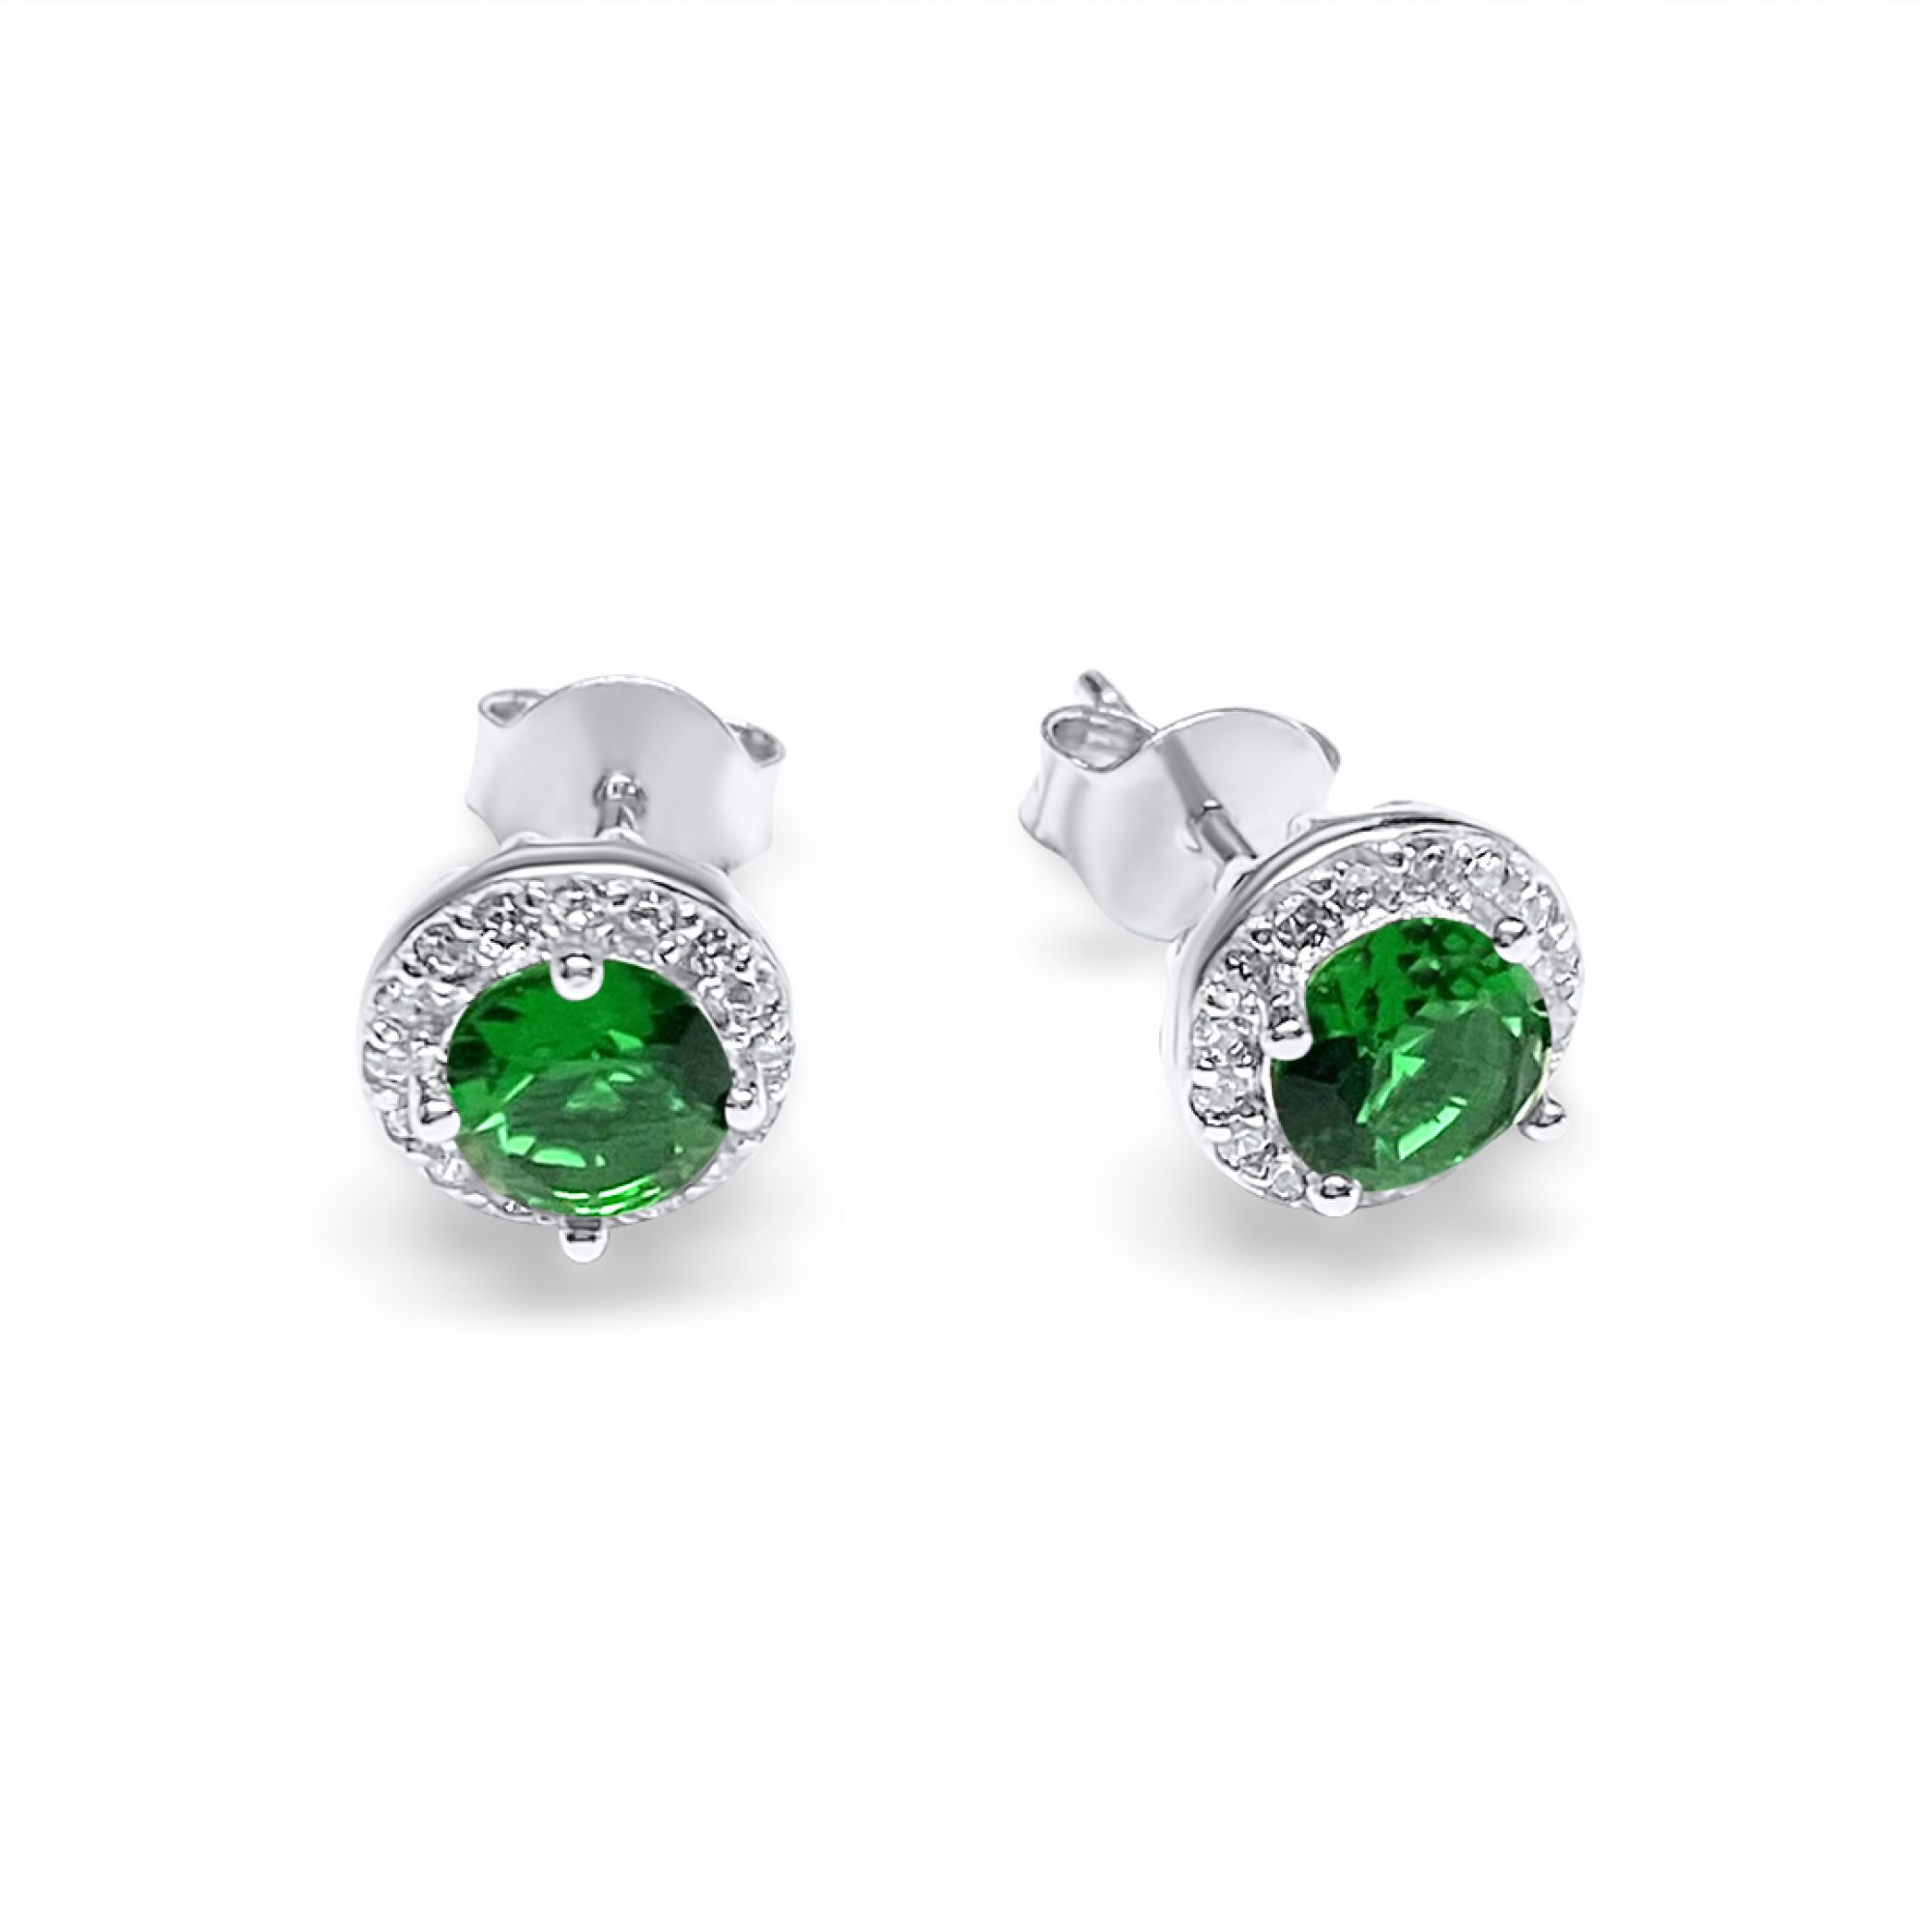 Silver stud earrings with emerald and zircon stones